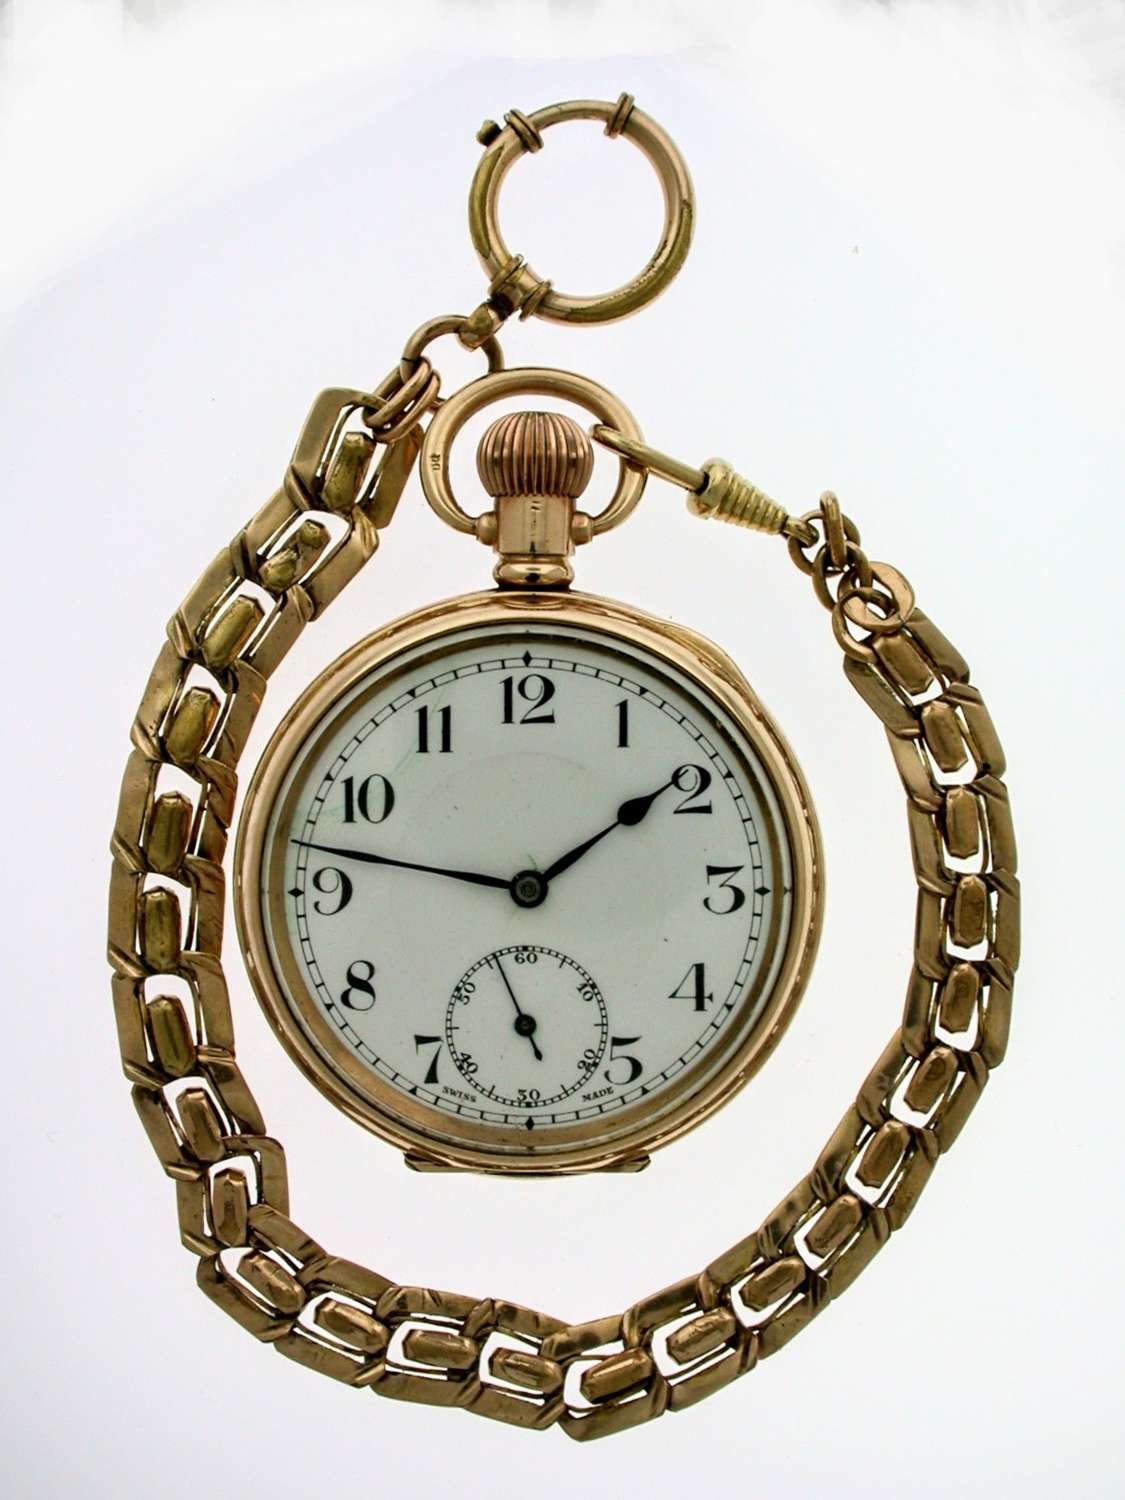 Antique Gold-Filled Open Face Pocket Watch  with Gold Filled Chain